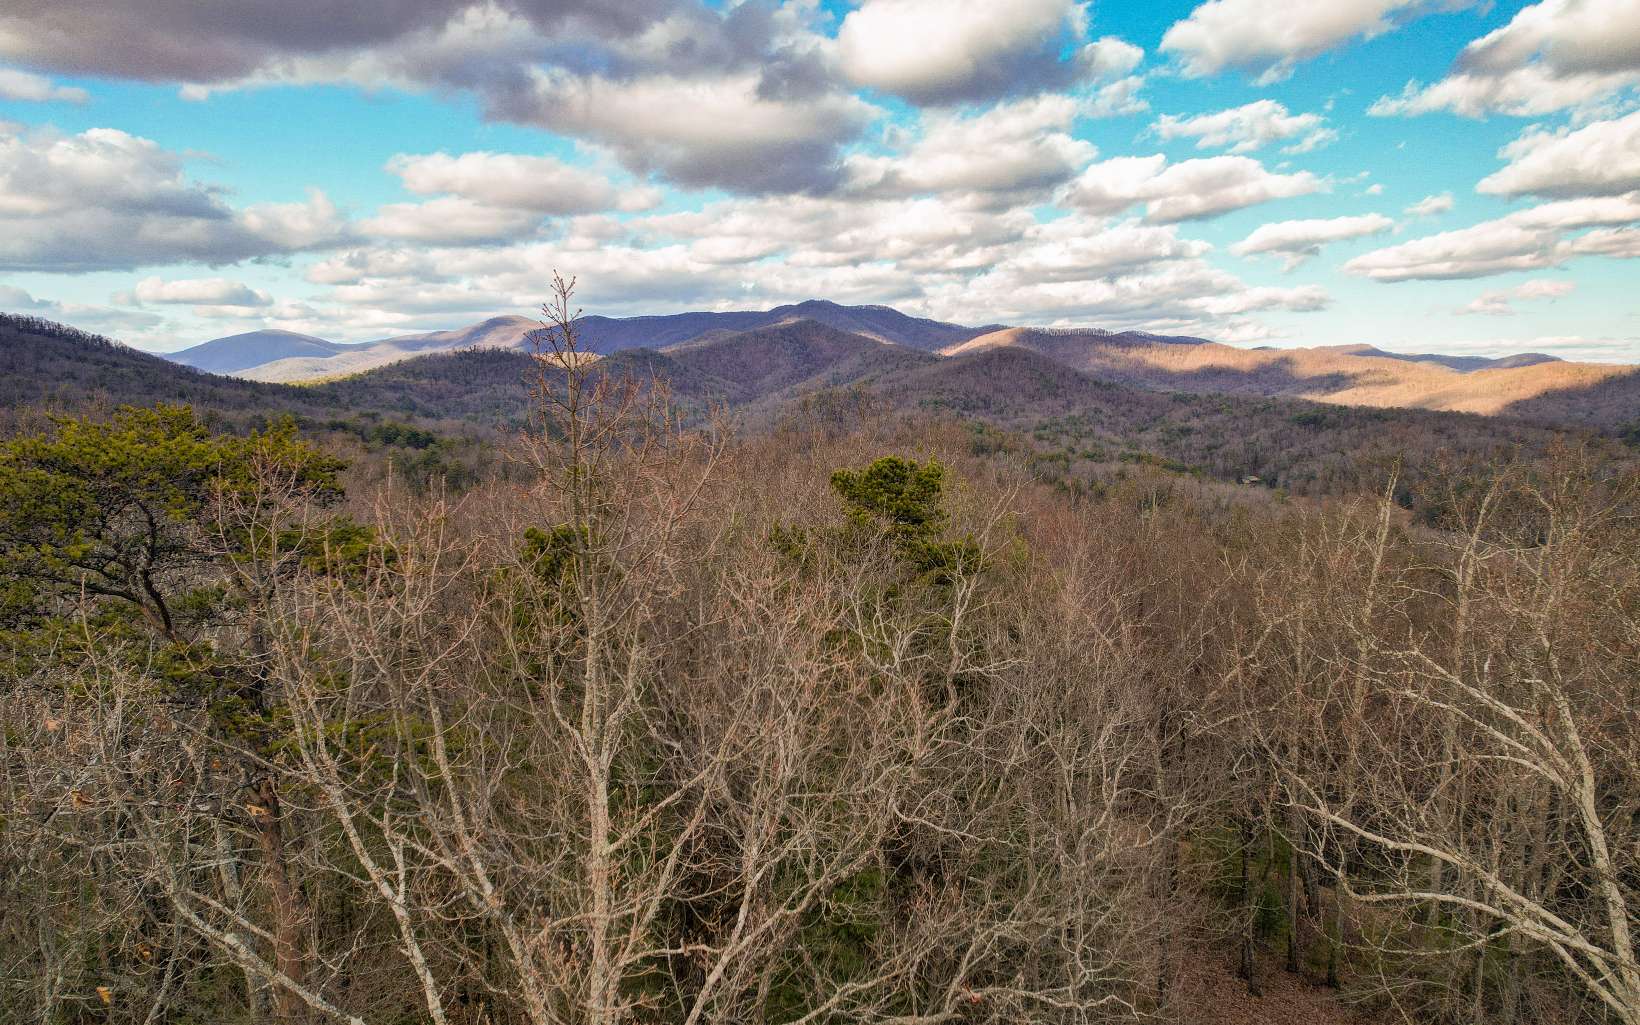 Excellent opportunity to get in on that large mountain tract you've been waiting for! This 36.32 acre property delivers on so many levels... panoramic mountain views, spring fed creeks and streams, well-maintained gravel roads, privacy, close to town, flowering mountain laurel's, giant hardwoods, and abundant wildlife! From the flat-top ridge line you can see mountain ranges as far as the eye can see, just imagine it! Whether you desire land all for yourself, a family compound, or development opportunity... the sky's the limit here. Located 5 miles from charming downtown Ellijay with boutique shopping and 5 star restaurants; but feels a world away! It's time!